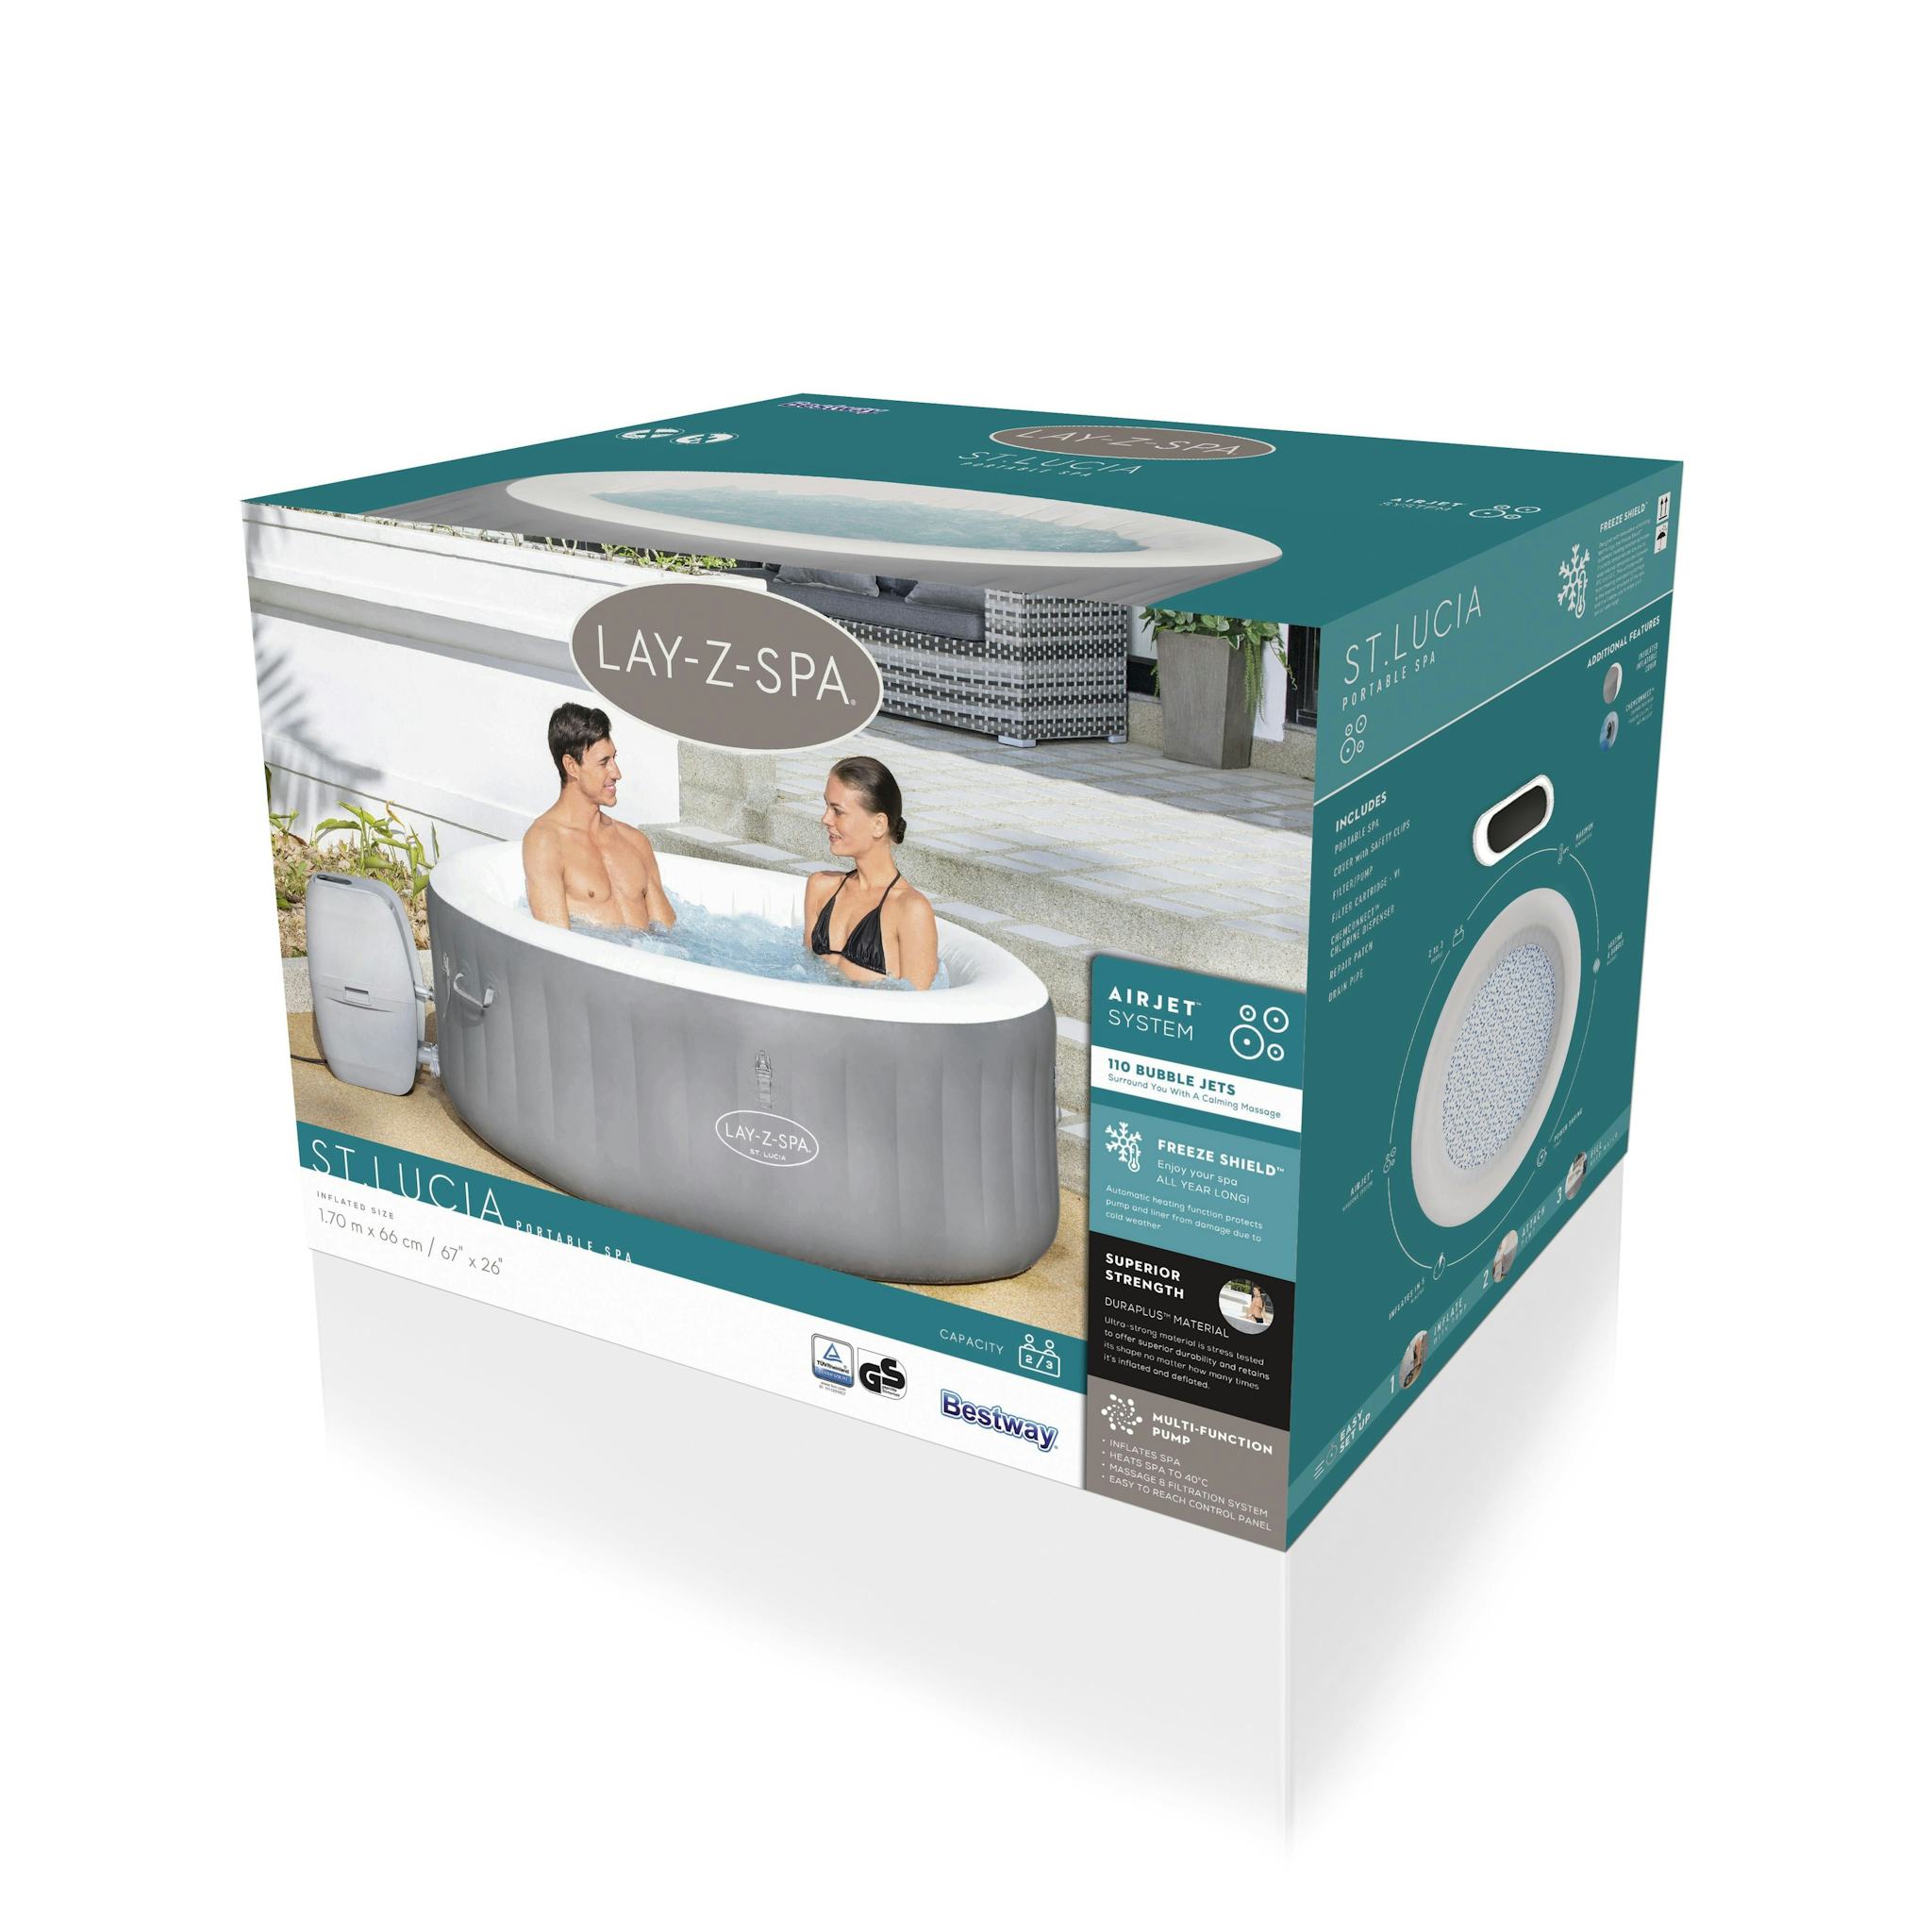 Spas Gonflables Spa gonflable rond St. Lucia AirJet™ Lay-Z-Spa®  2-3 personnes Bestway 18